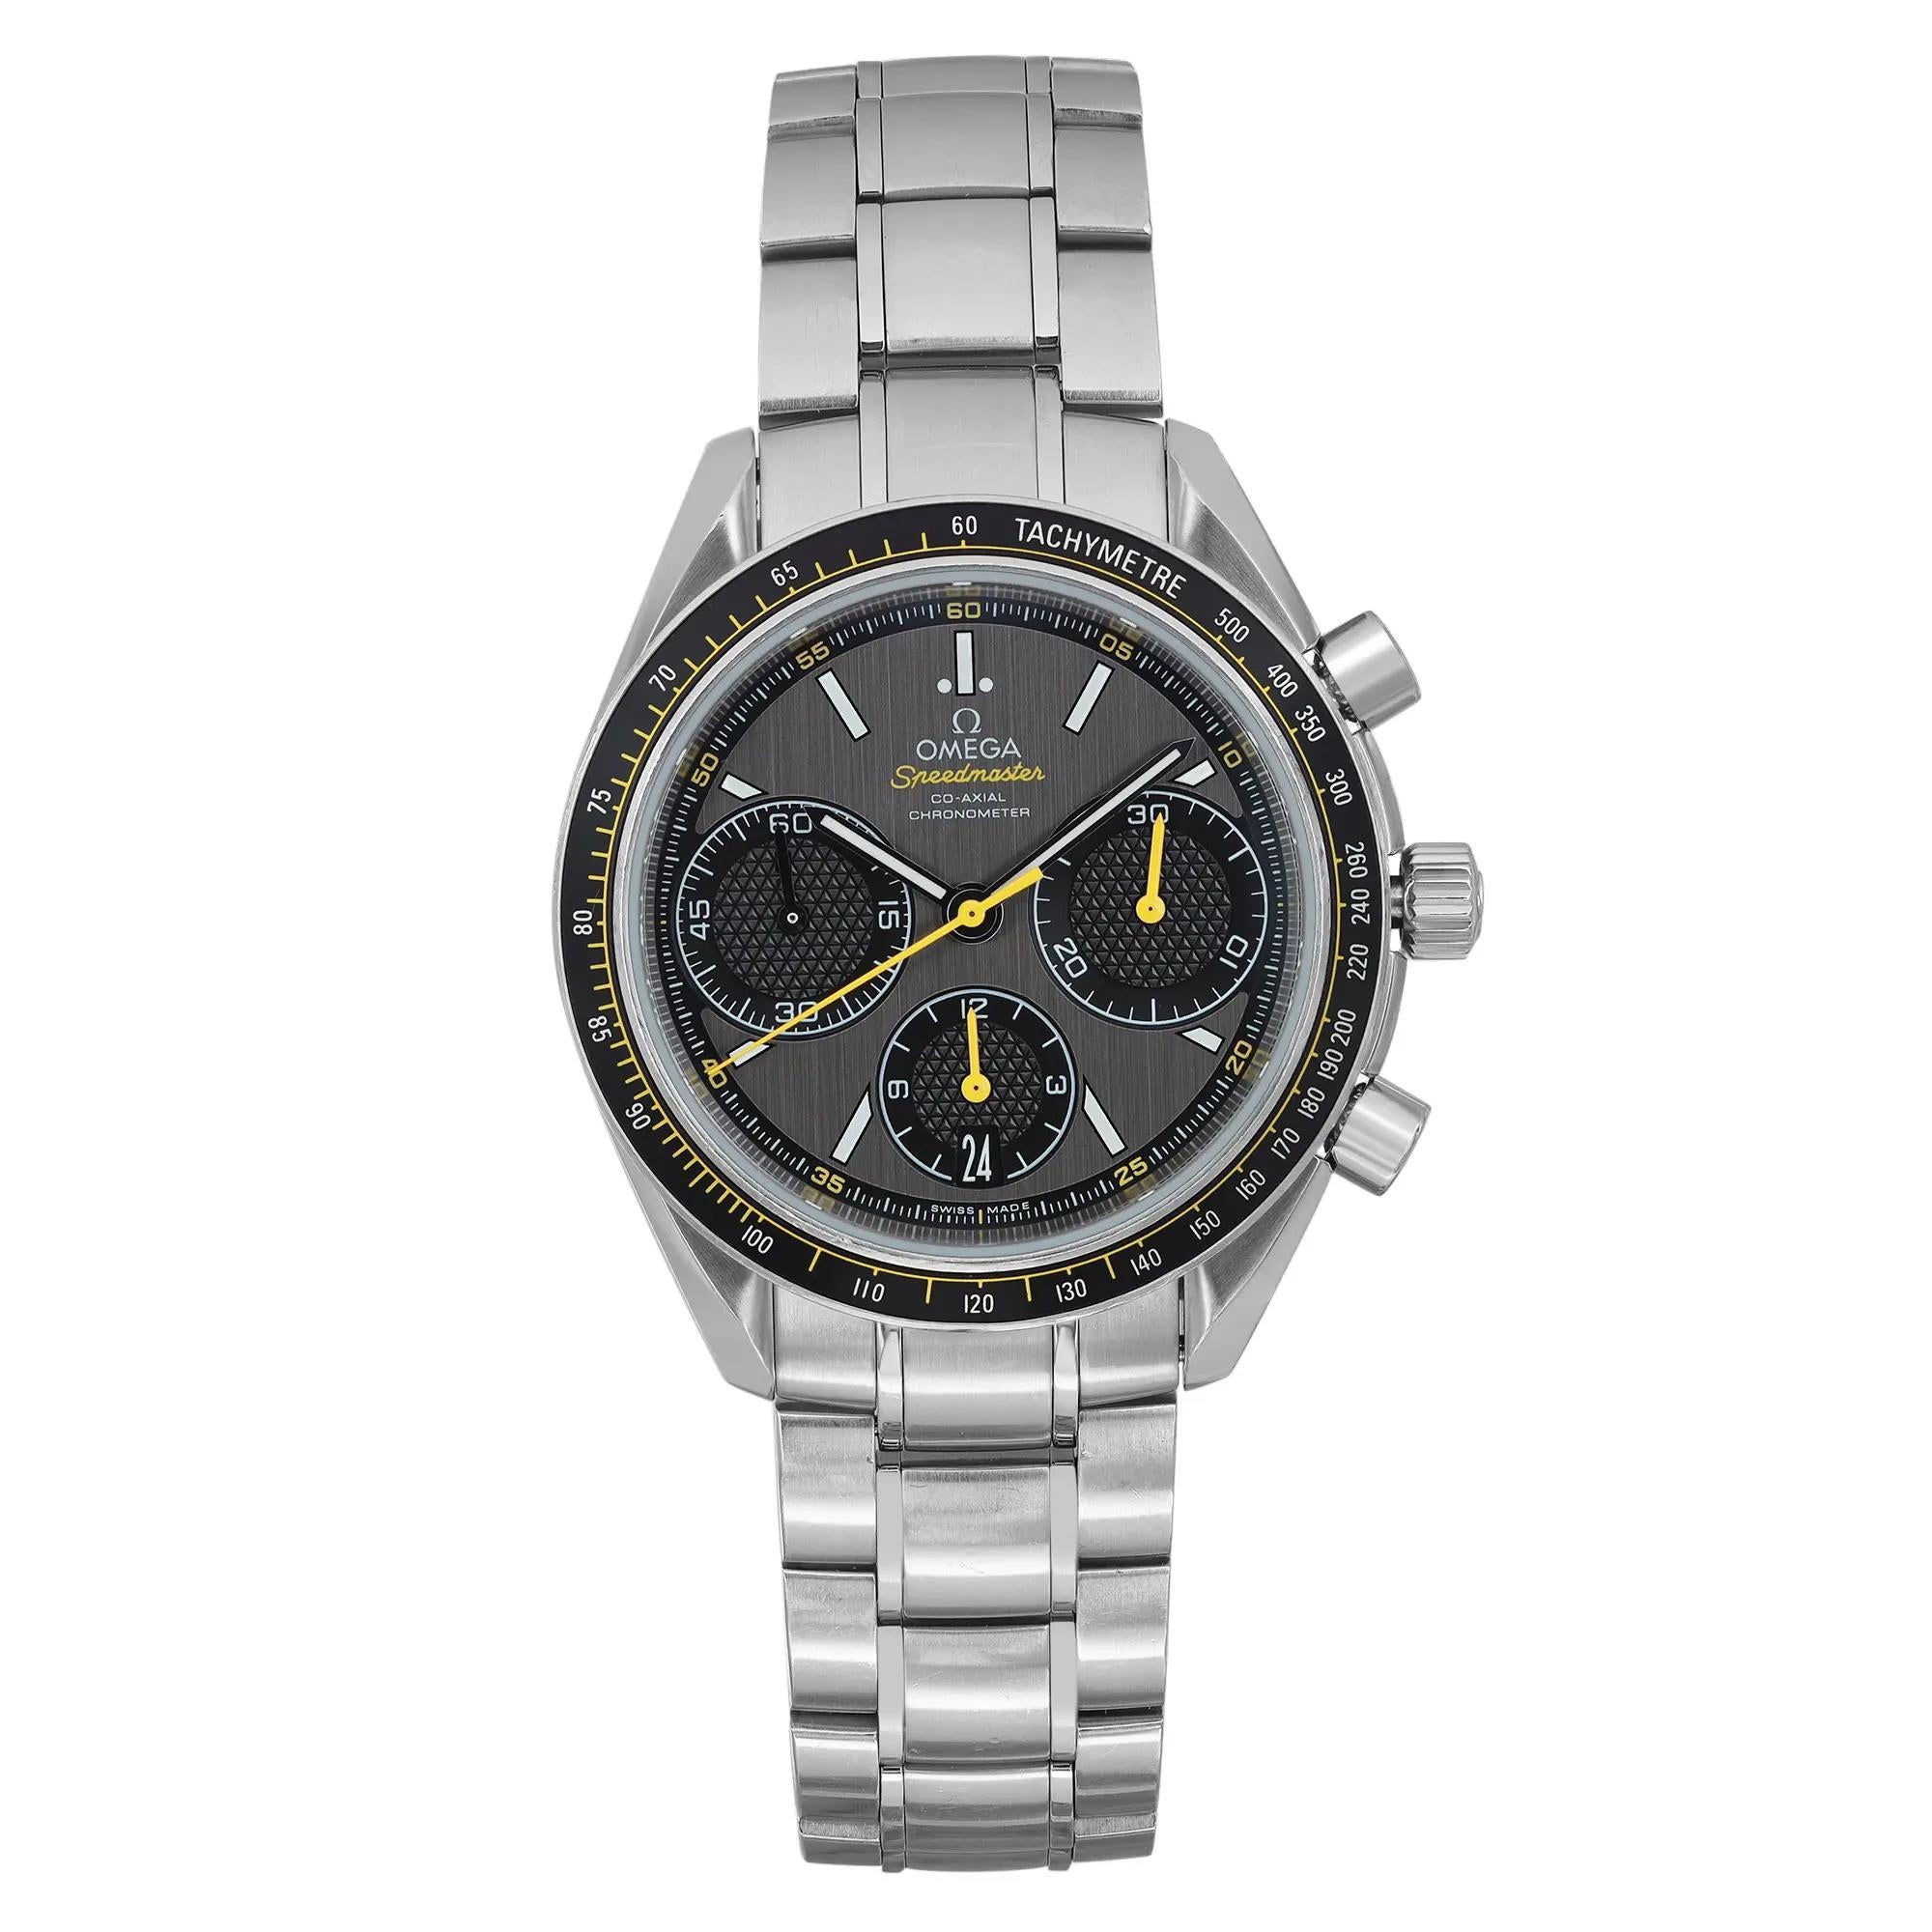 Omega Speedmaster Racing Gray Dial Automatic Mens Watch 326.30.40.50.06.001